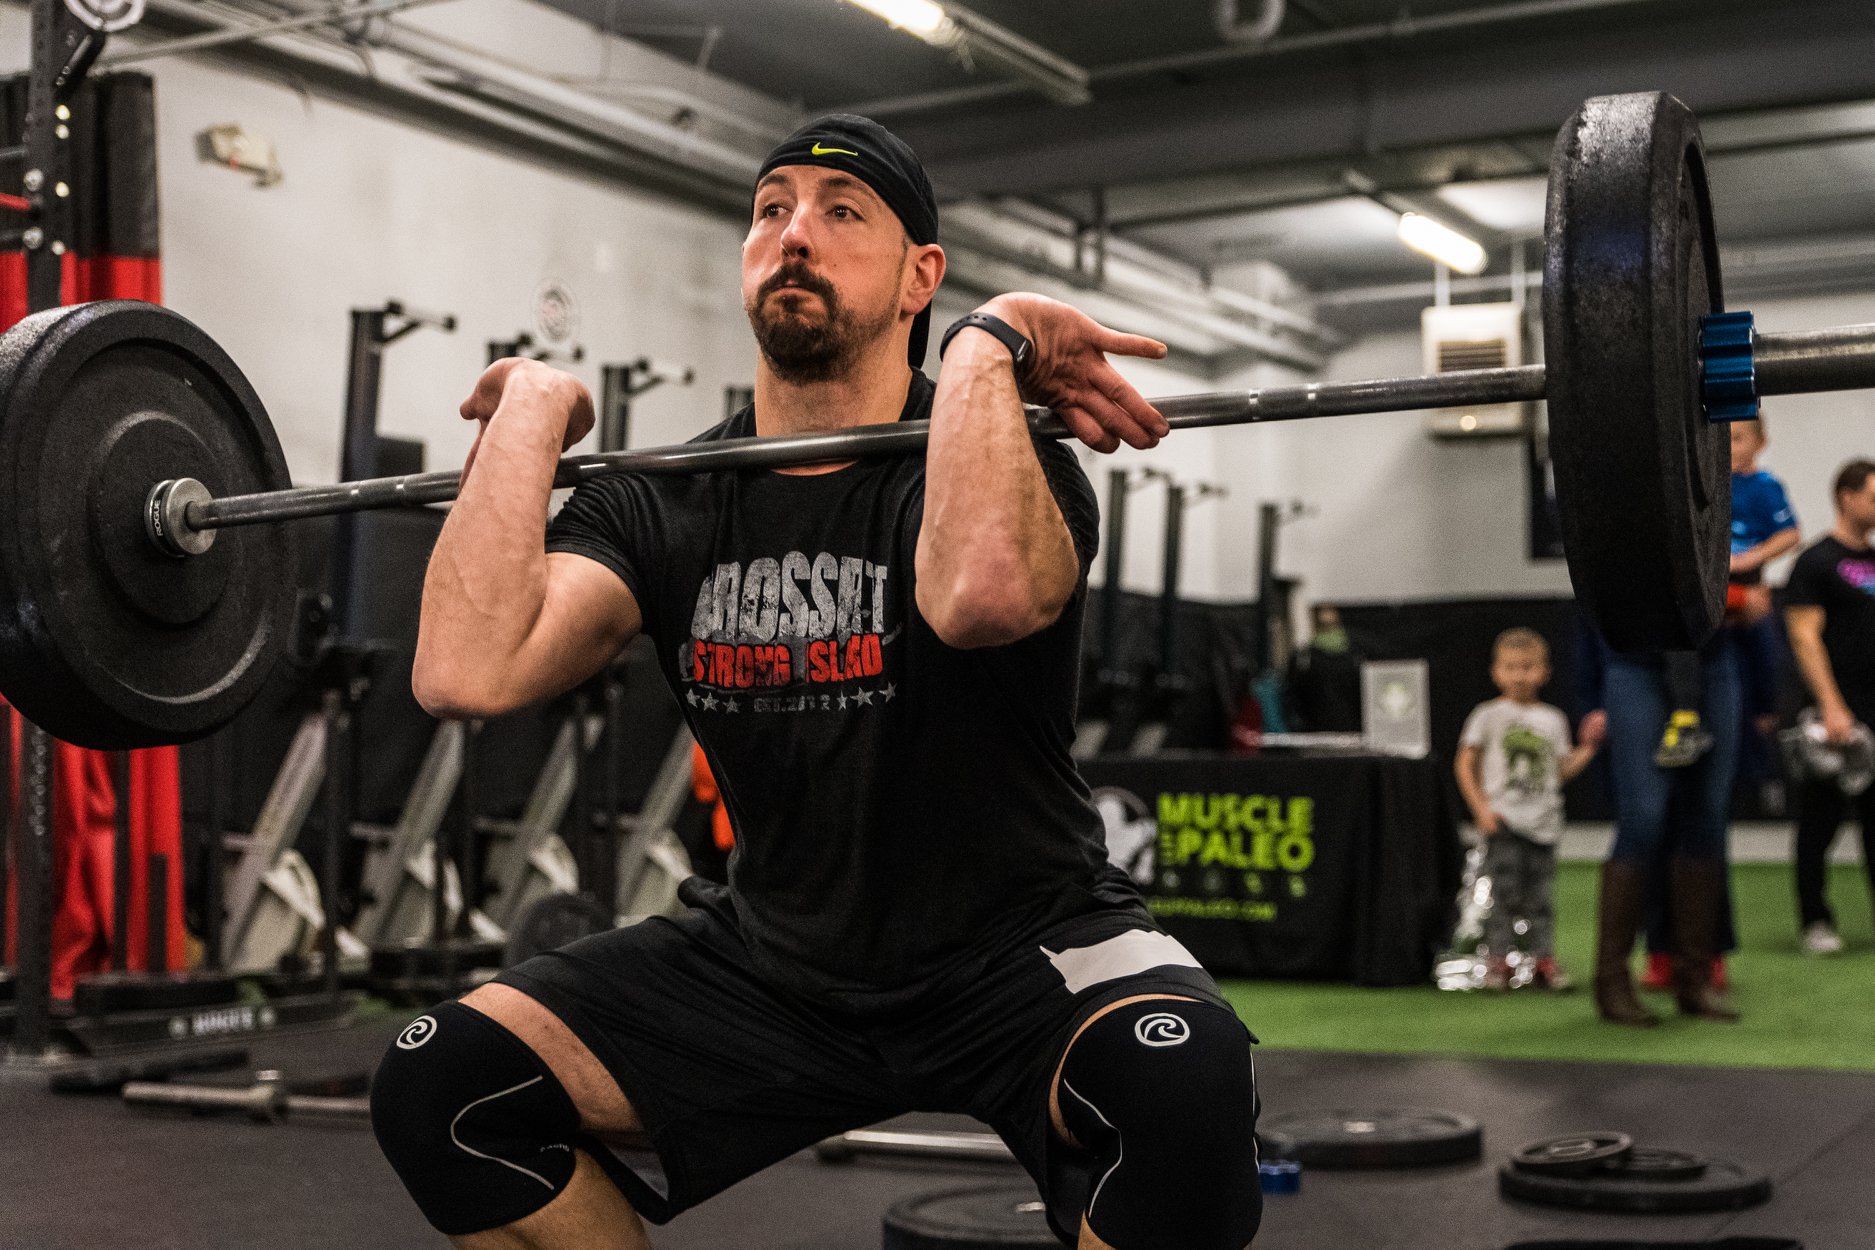 Wednesday 7/31/19 - CrossFit Strong Island